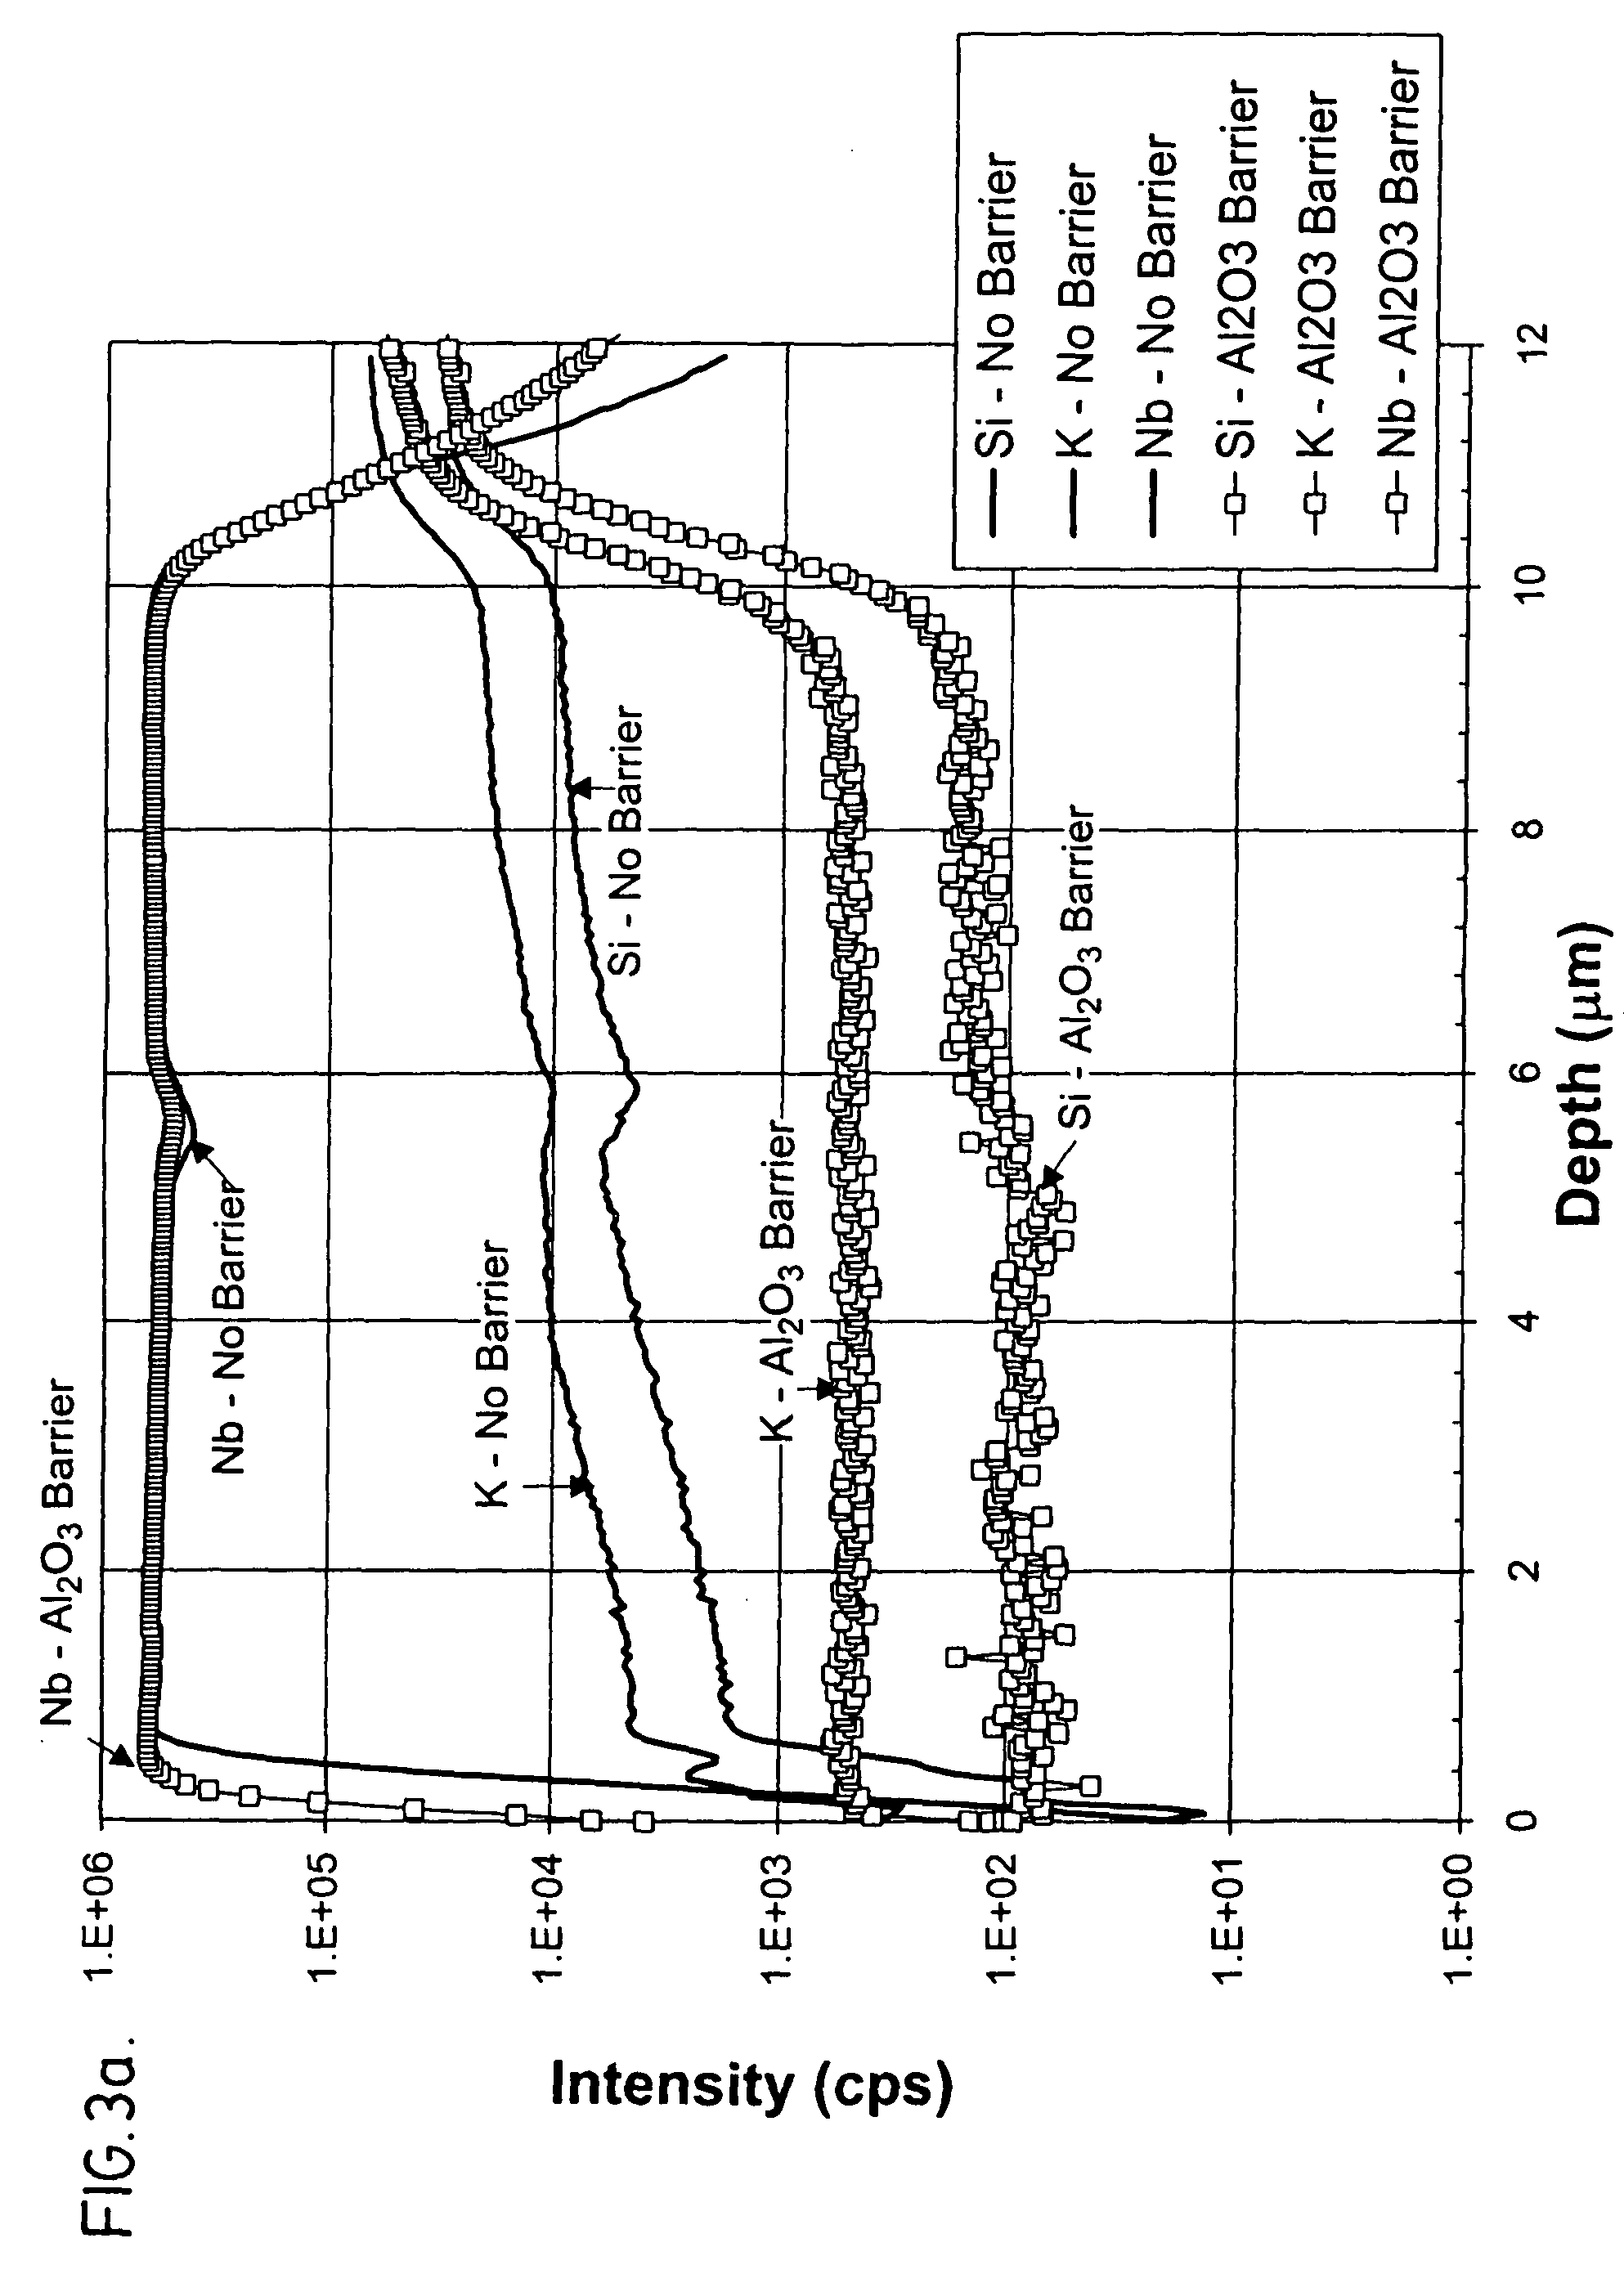 Barrier layer for thick film dielectric electroluminescent displays